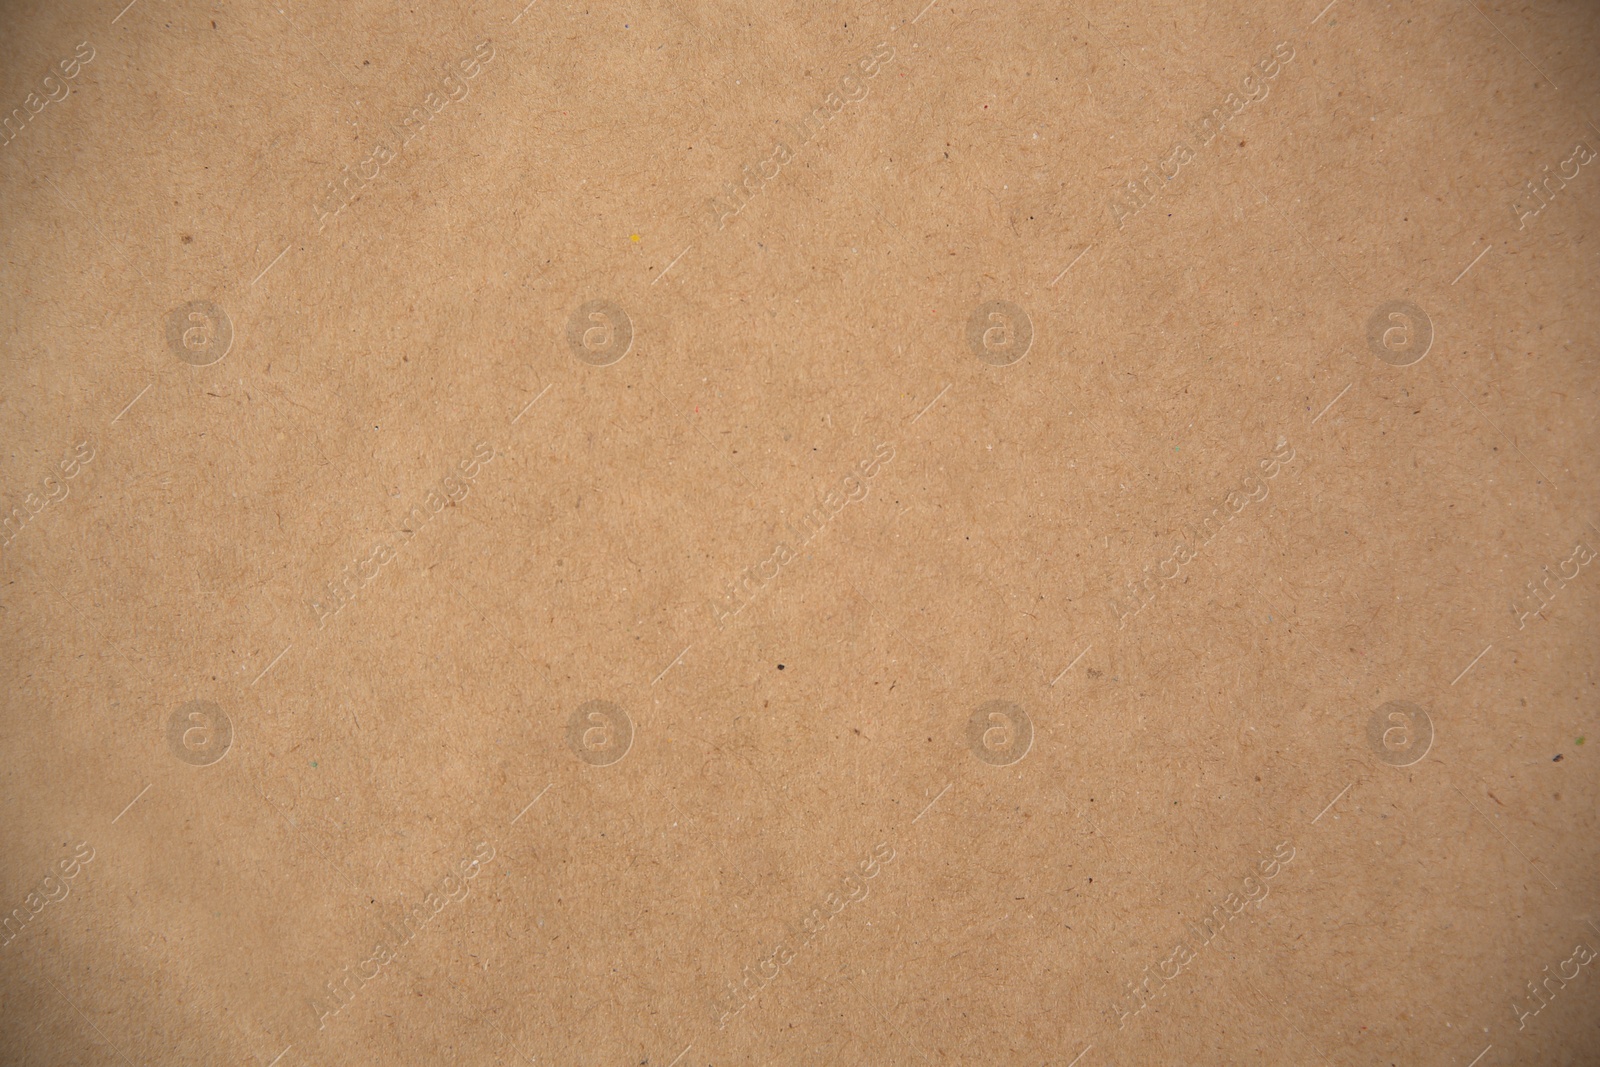 Image of Texture of old paper as background, top view